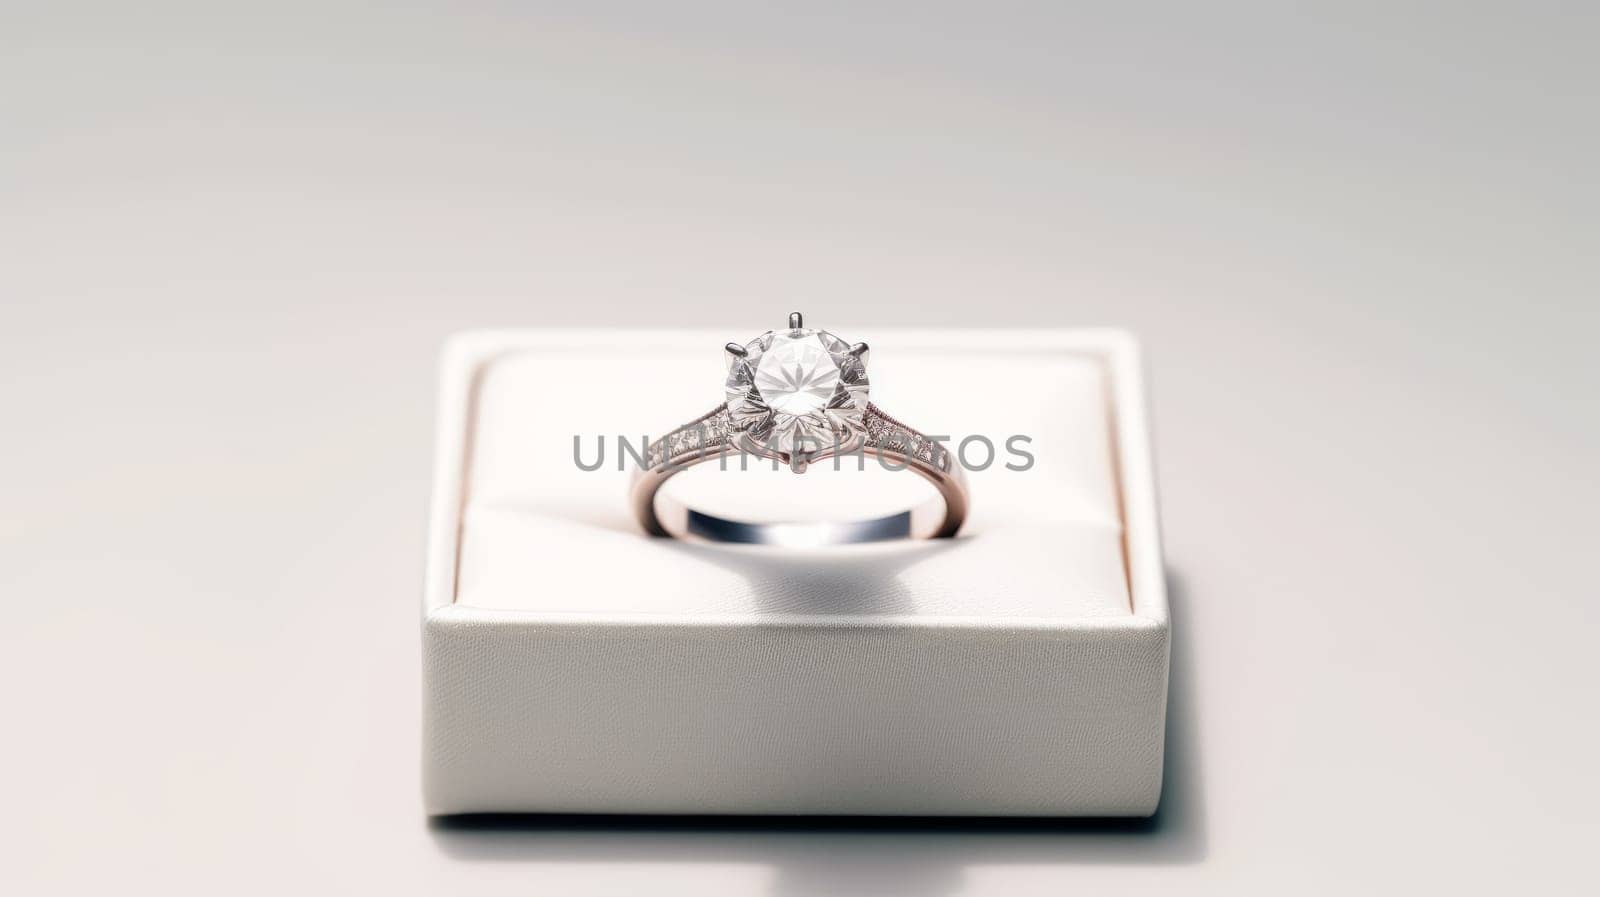 Diamond engagement ring in white box on grey background. Round diamond in four prong setting. White gold band with filigree design. Perfect for themes of love, romance and marriage. High quality photo